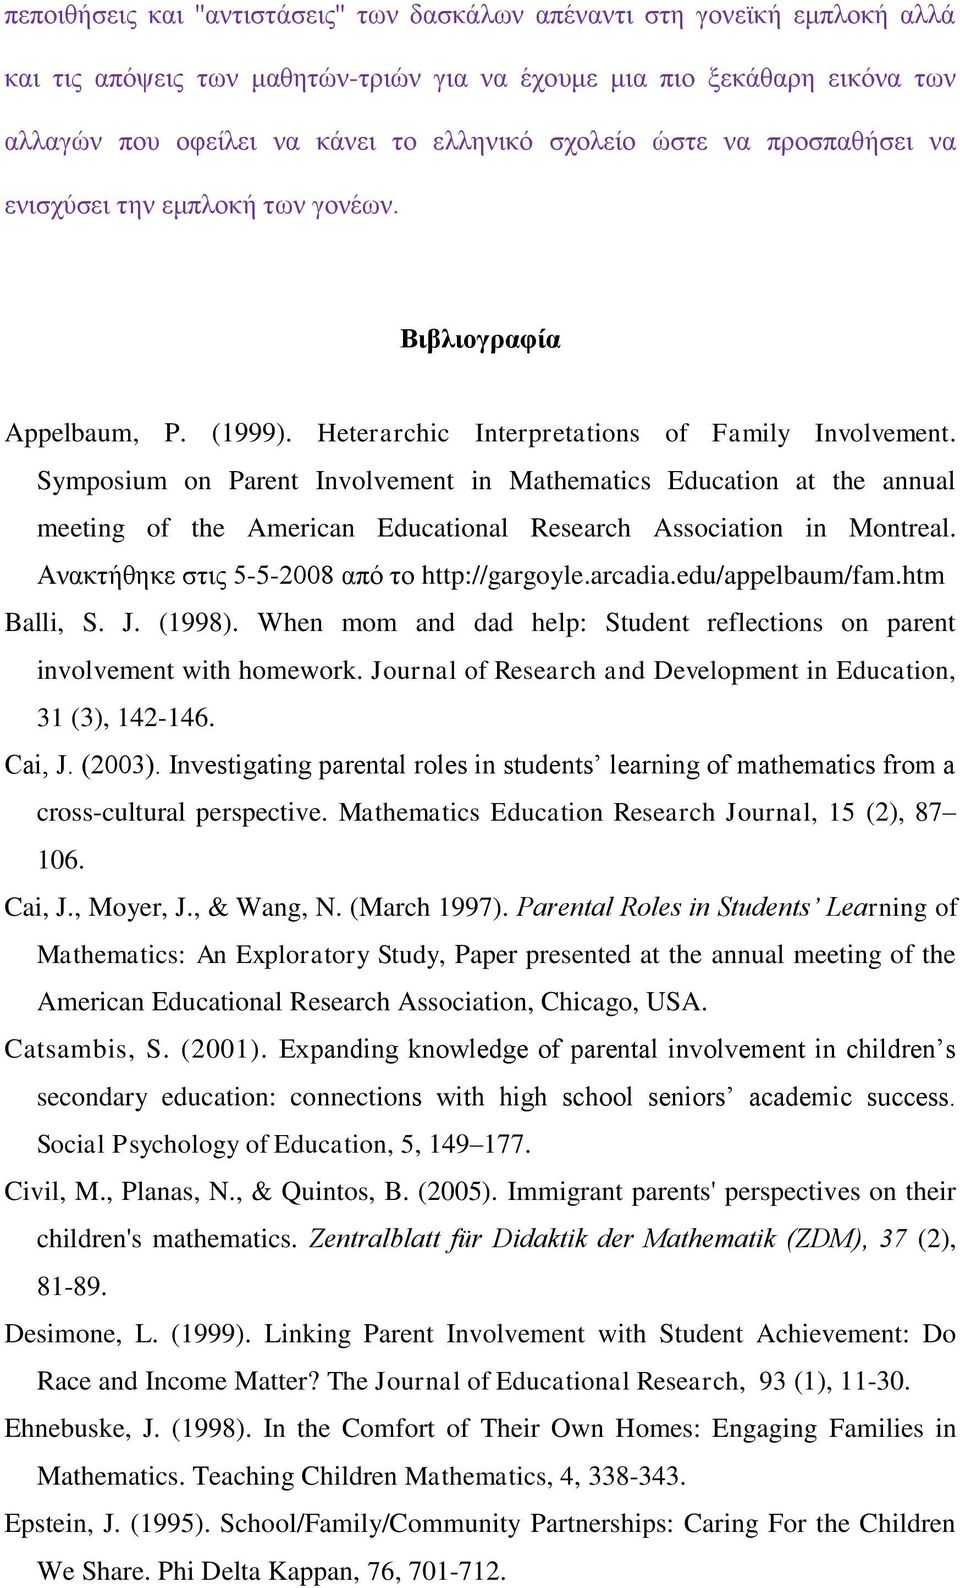 Symposium on Parent Involvement in Mathematics Education at the annual meeting of the American Educational Research Association in Montreal. Αλαθηήζεθε ζηηο 5-5-2008 από ην http://gargoyle.arcadia.